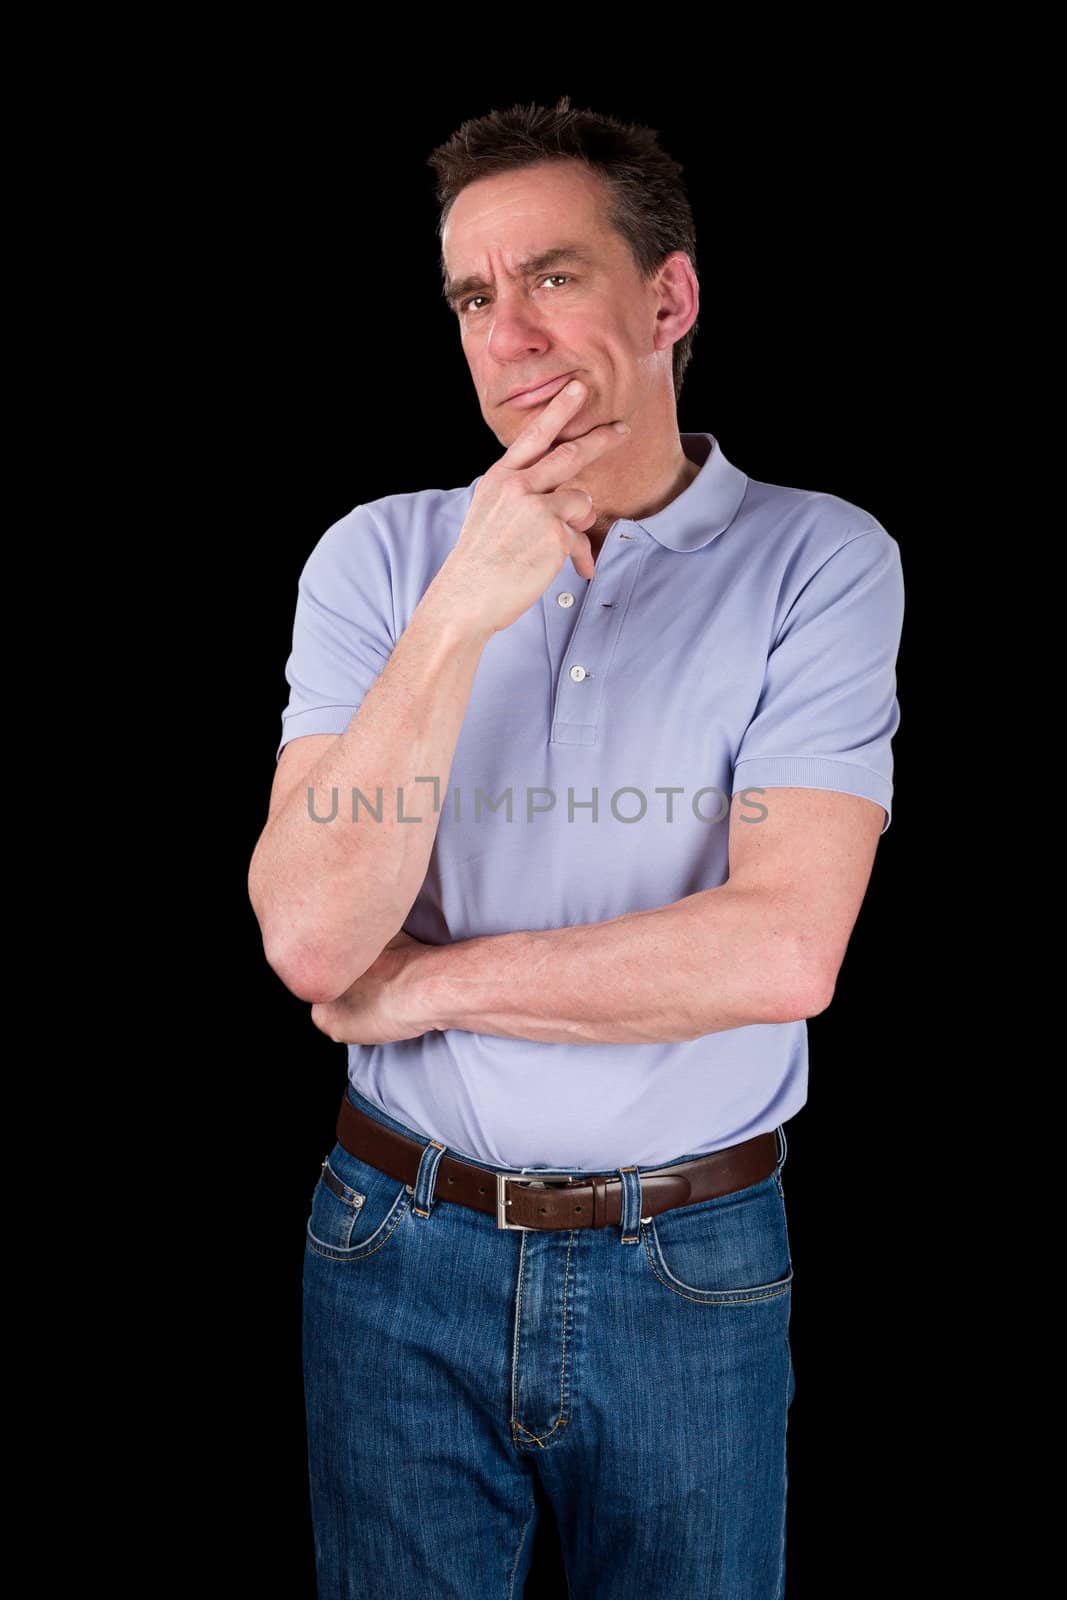 Pensive Middle Age Man with Hand to Chin in Thought Black Background